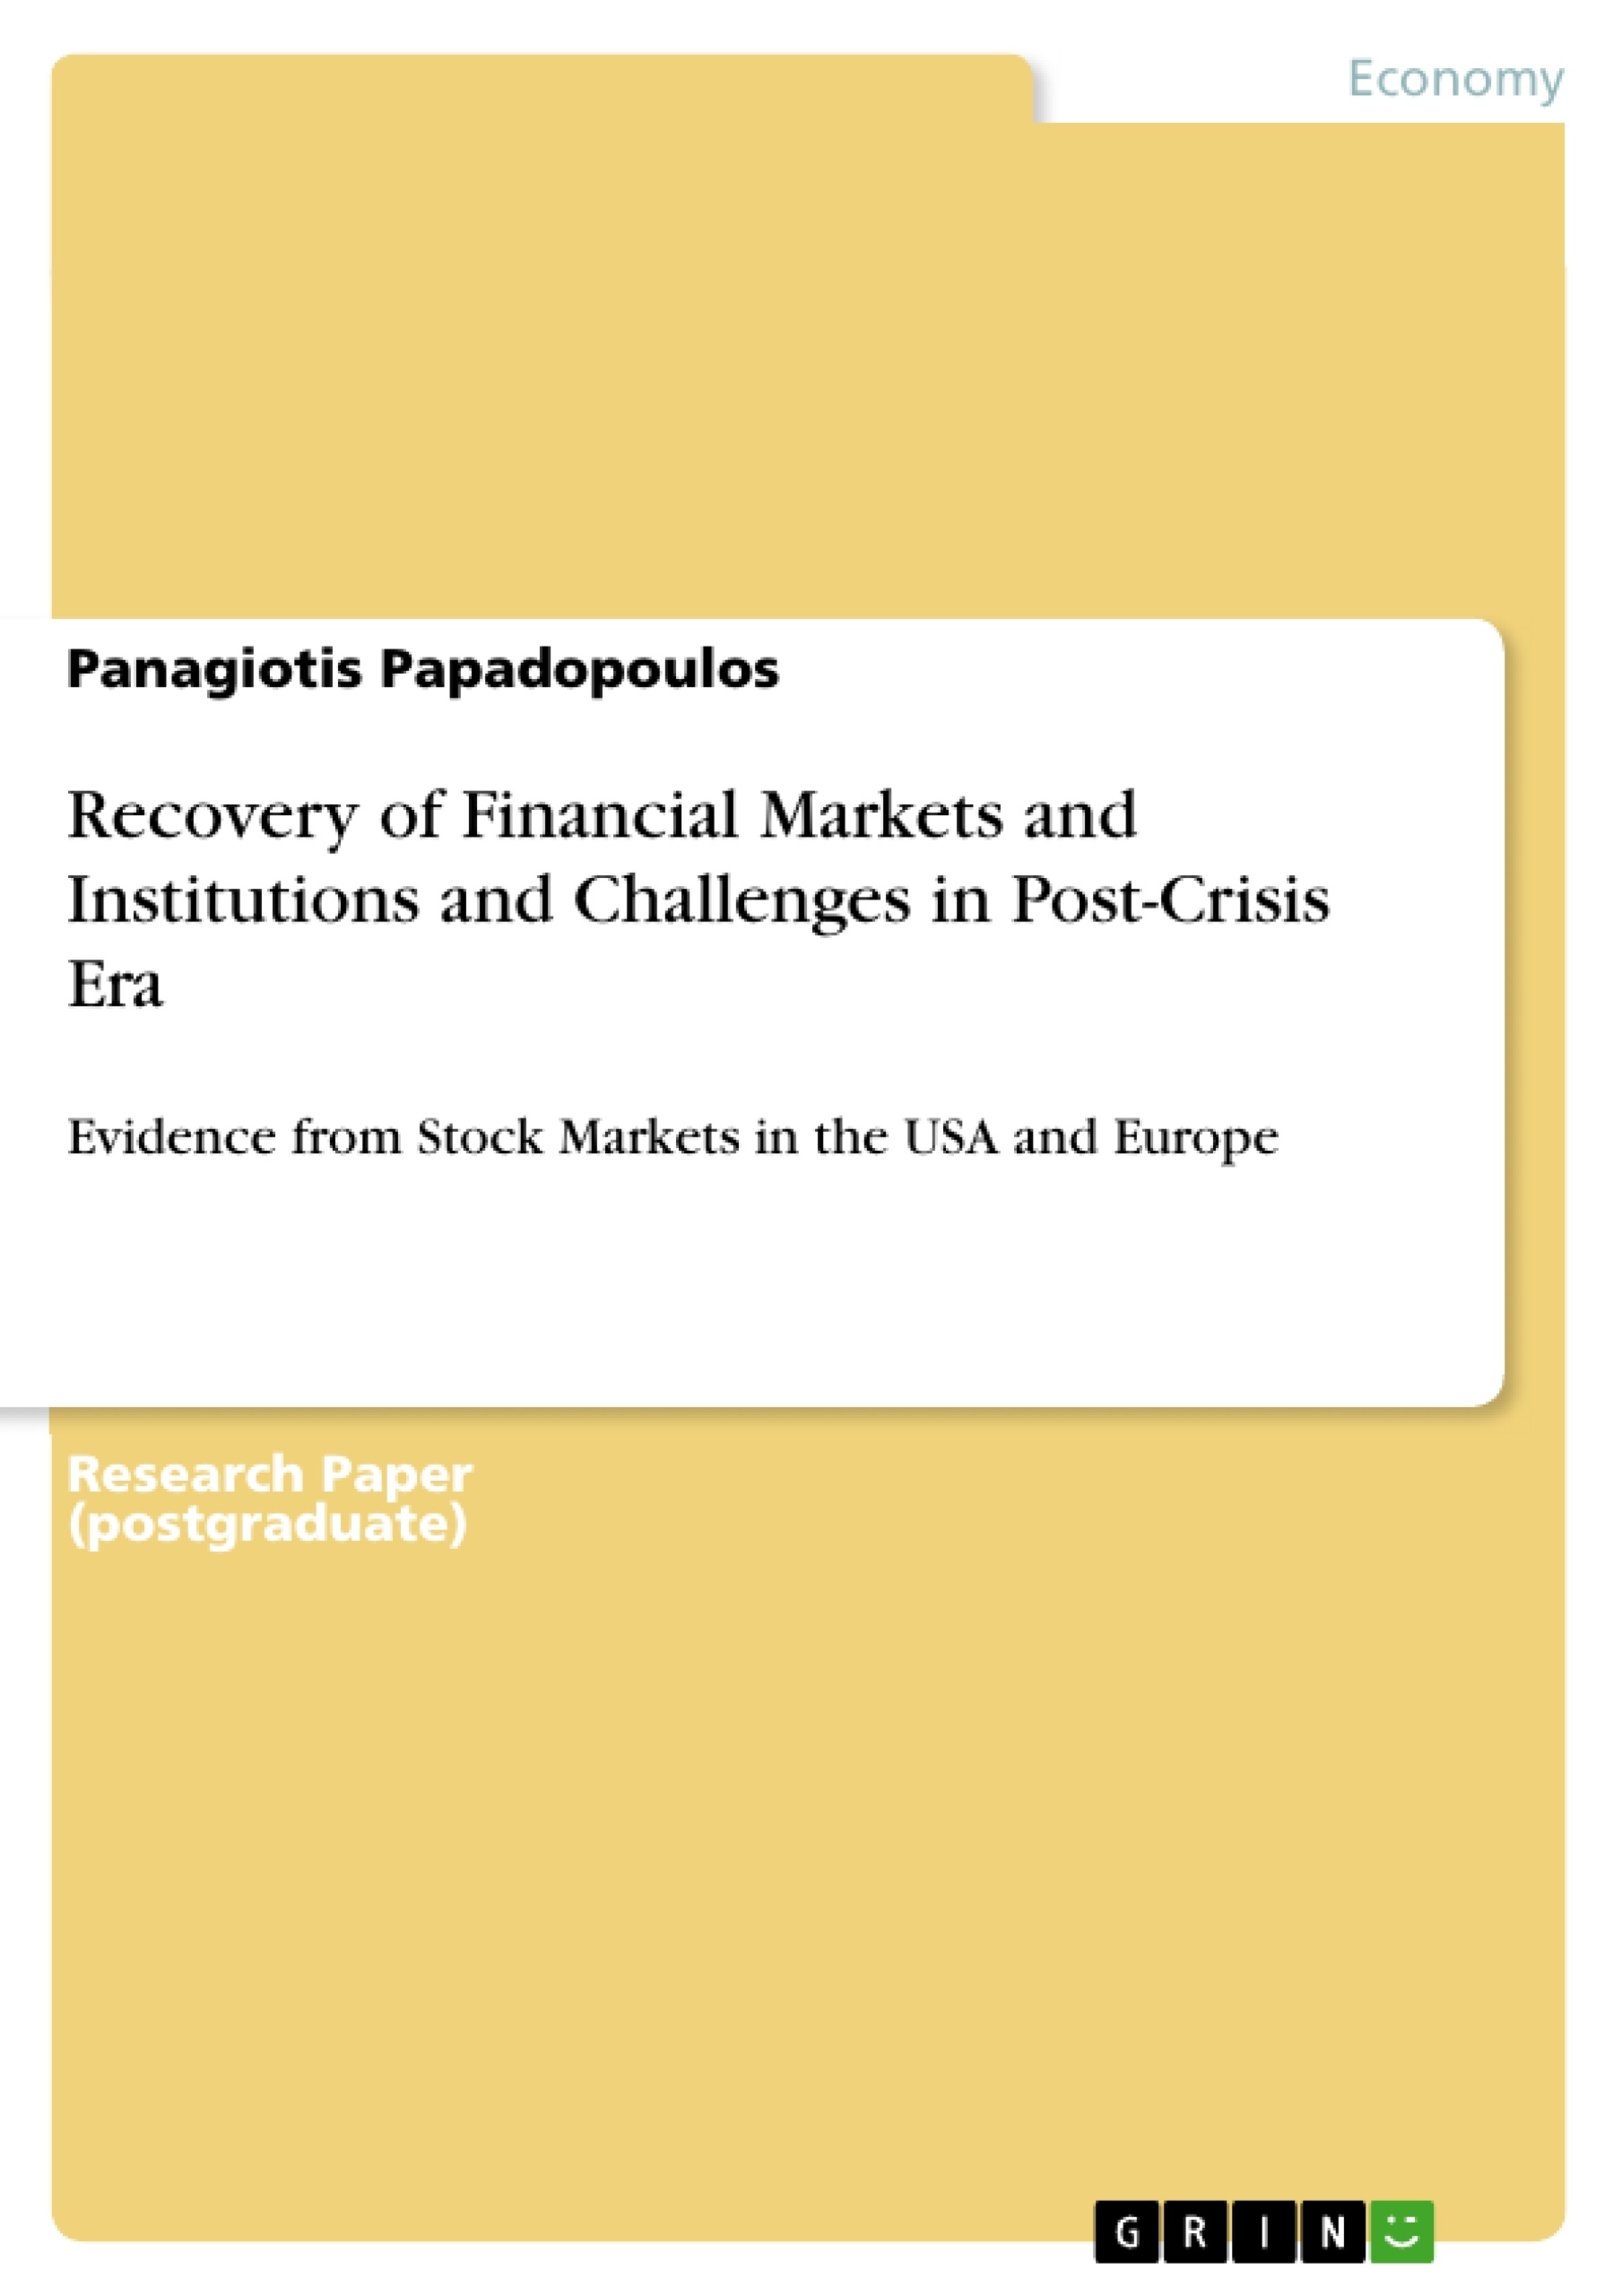 Title: Recovery of Financial Markets and Institutions and Challenges in Post-Crisis Era